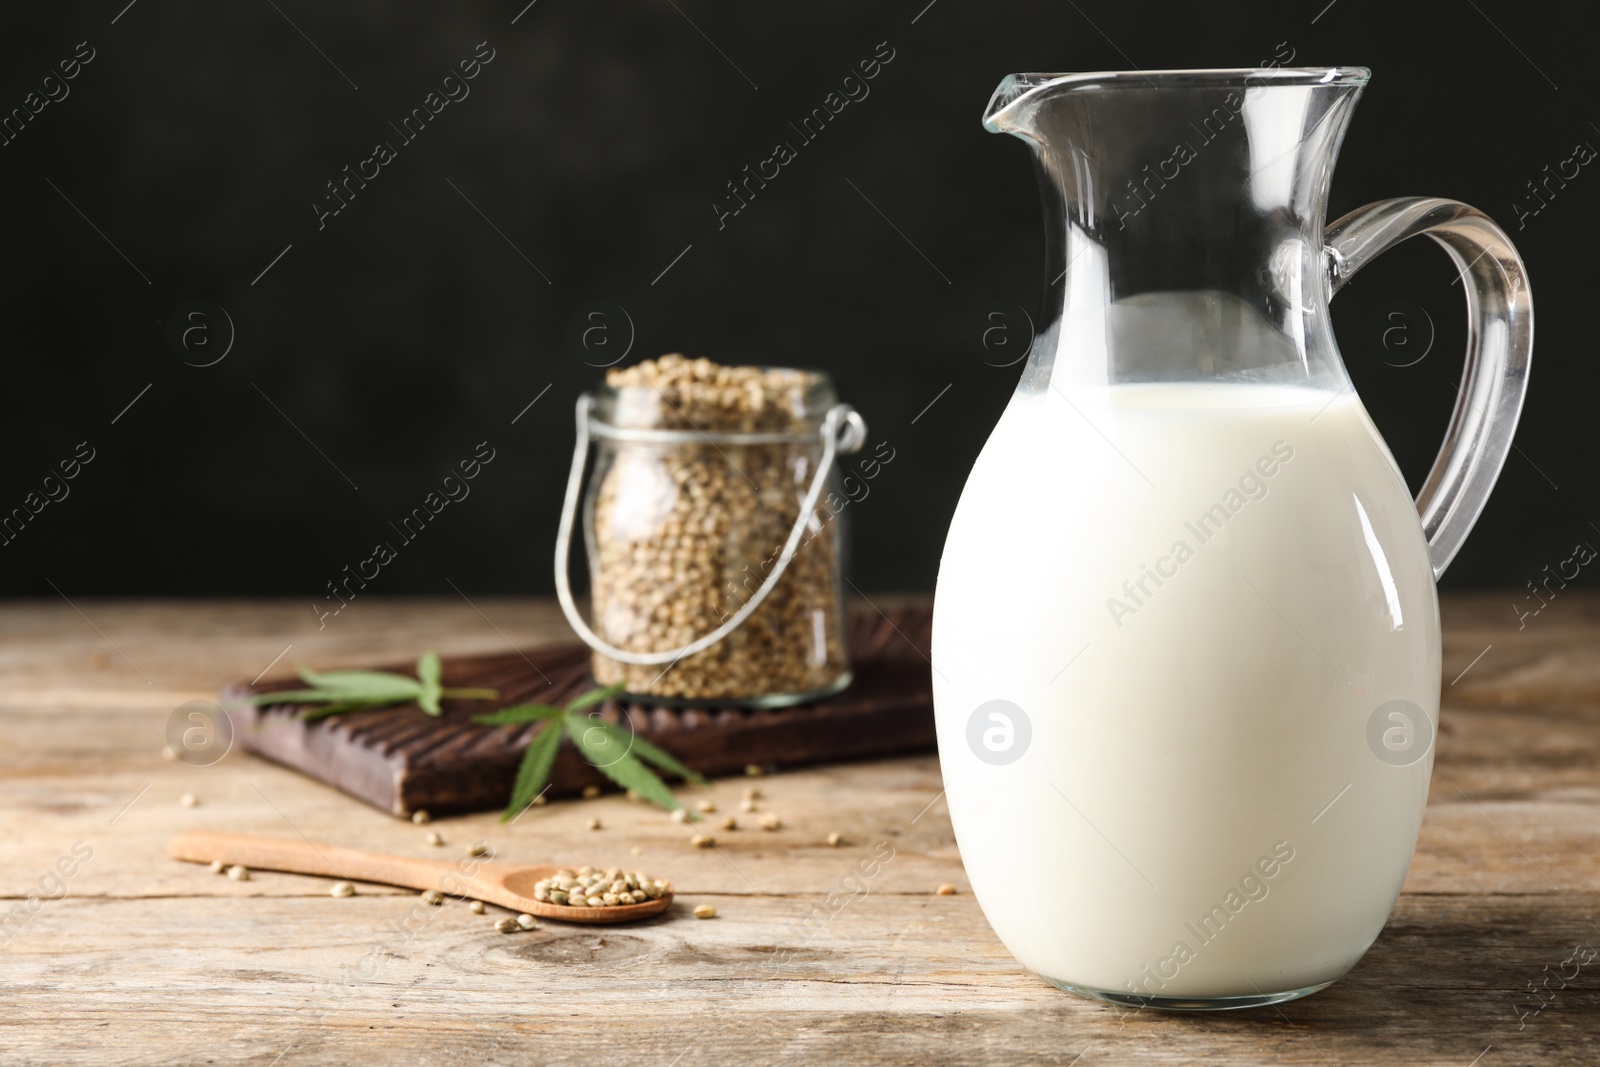 Photo of Composition with pitcher of hemp milk on wooden table against black background. Space for text